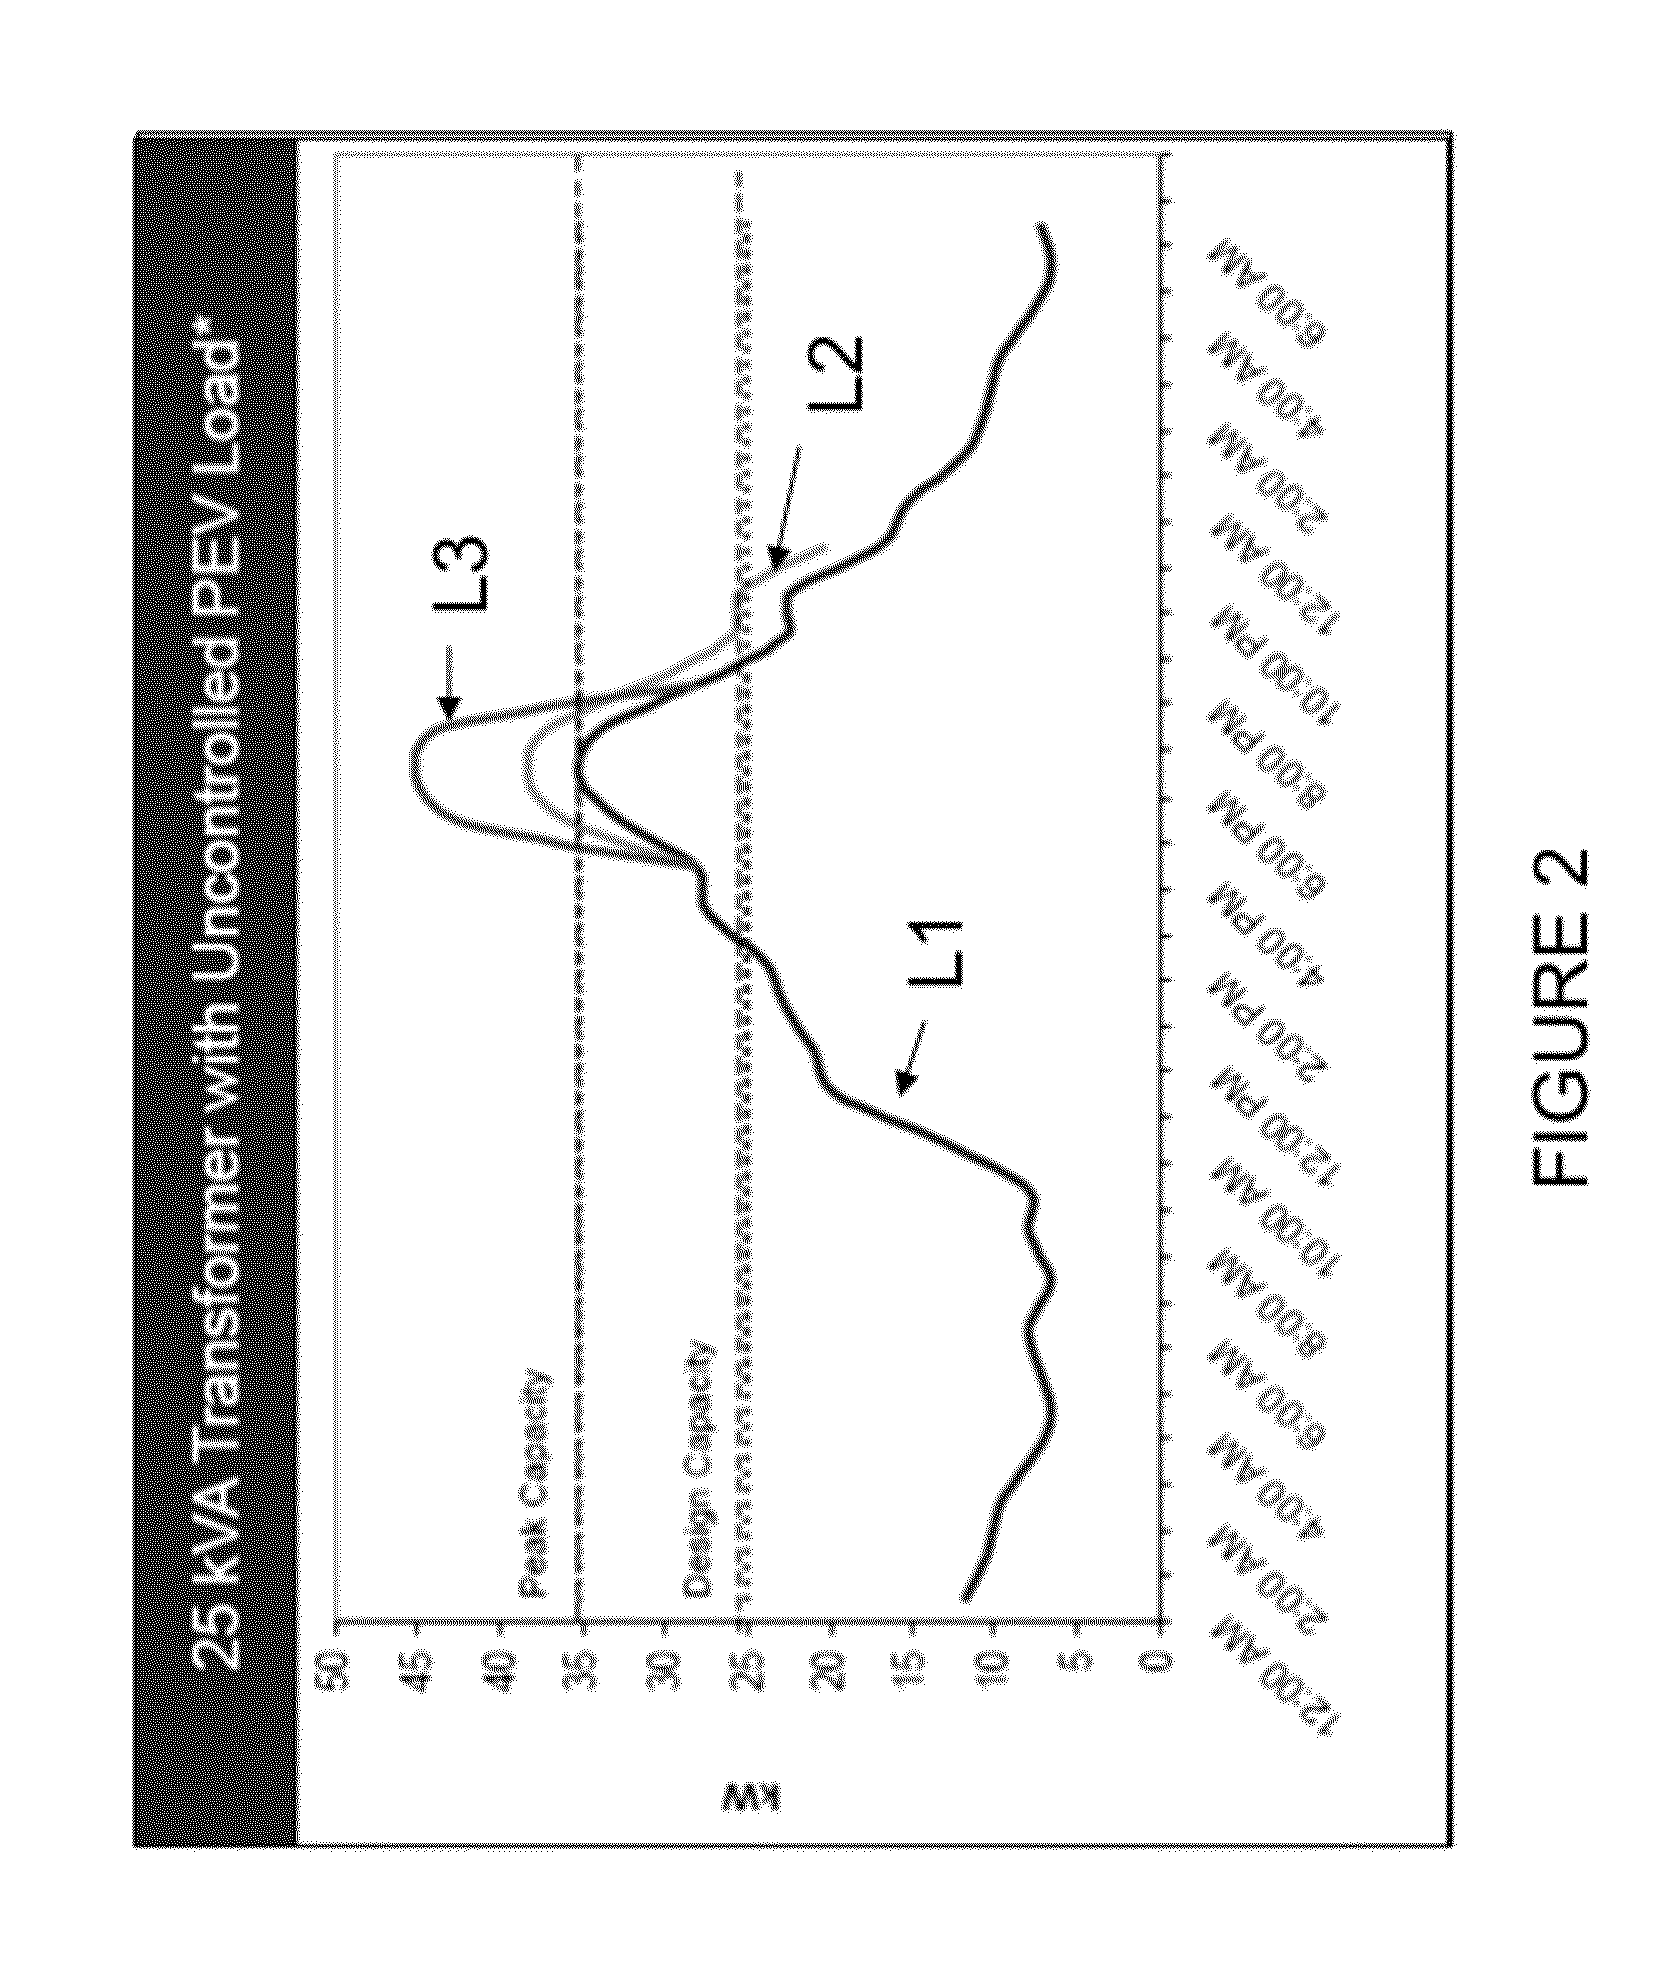 System and method for managing load distribution across a power grid